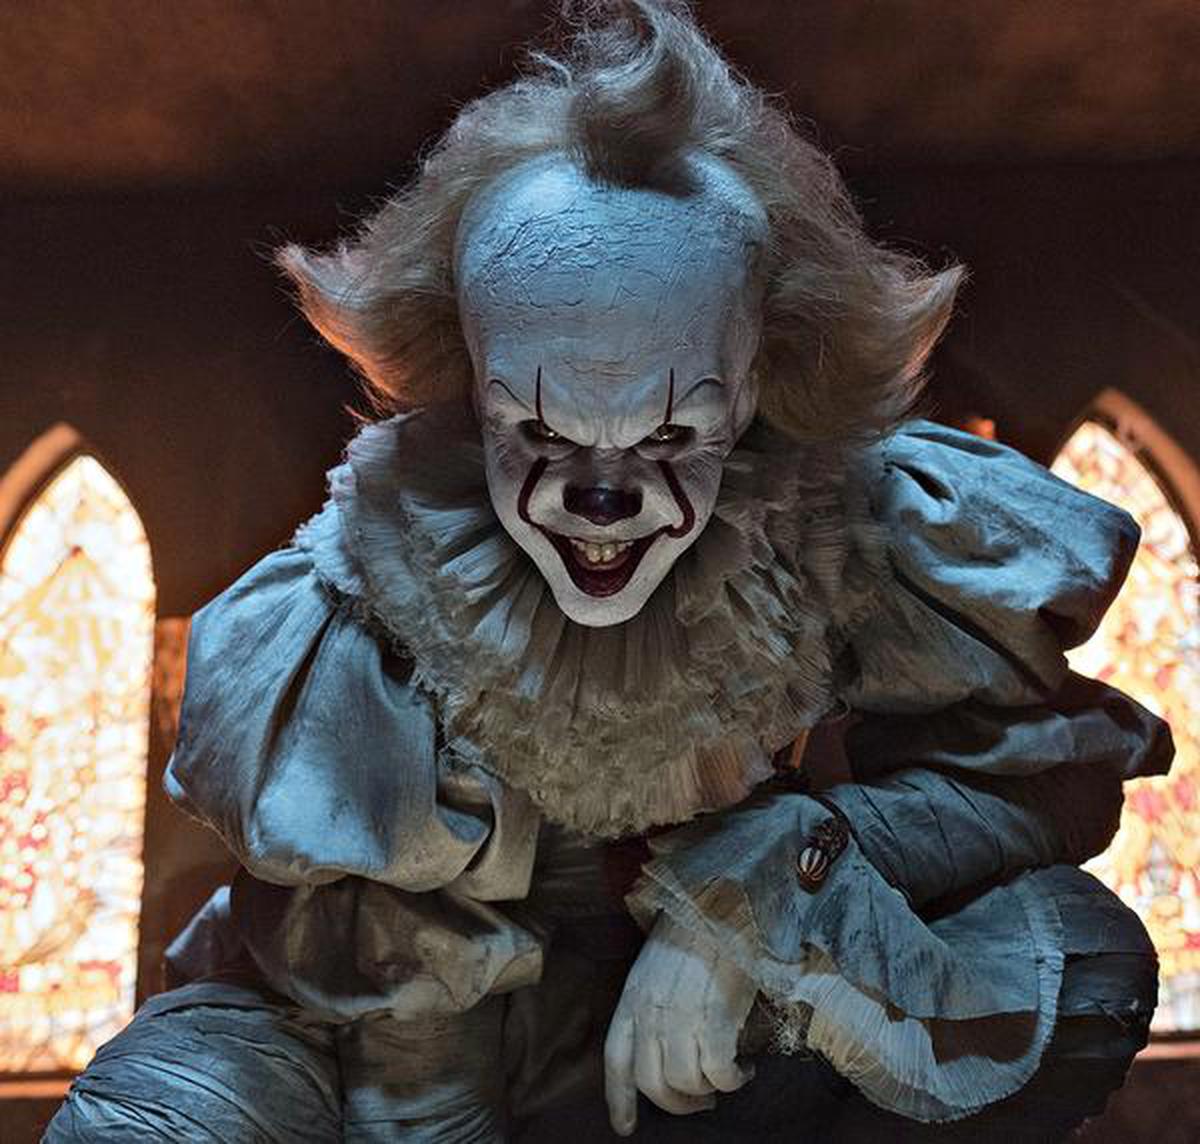 With 'It' doing excellently at the box office, now's a good time